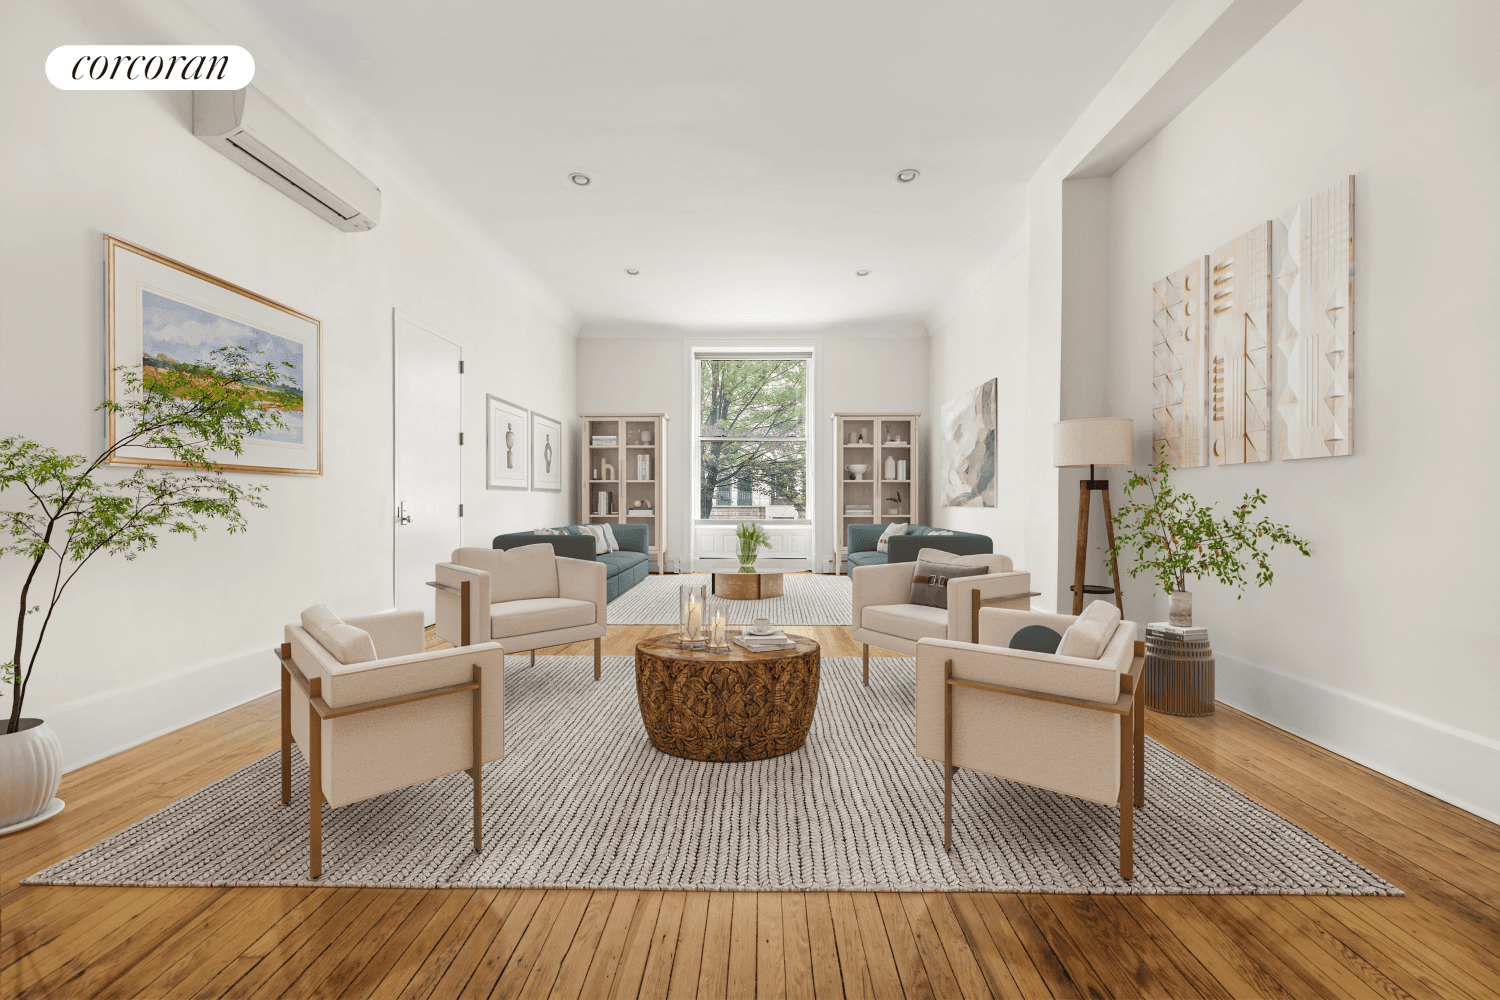 Introducing the exquisite duplex 672 St Mark's Ave, a remarkable residence situated in the vibrant heart of Crown Heights !